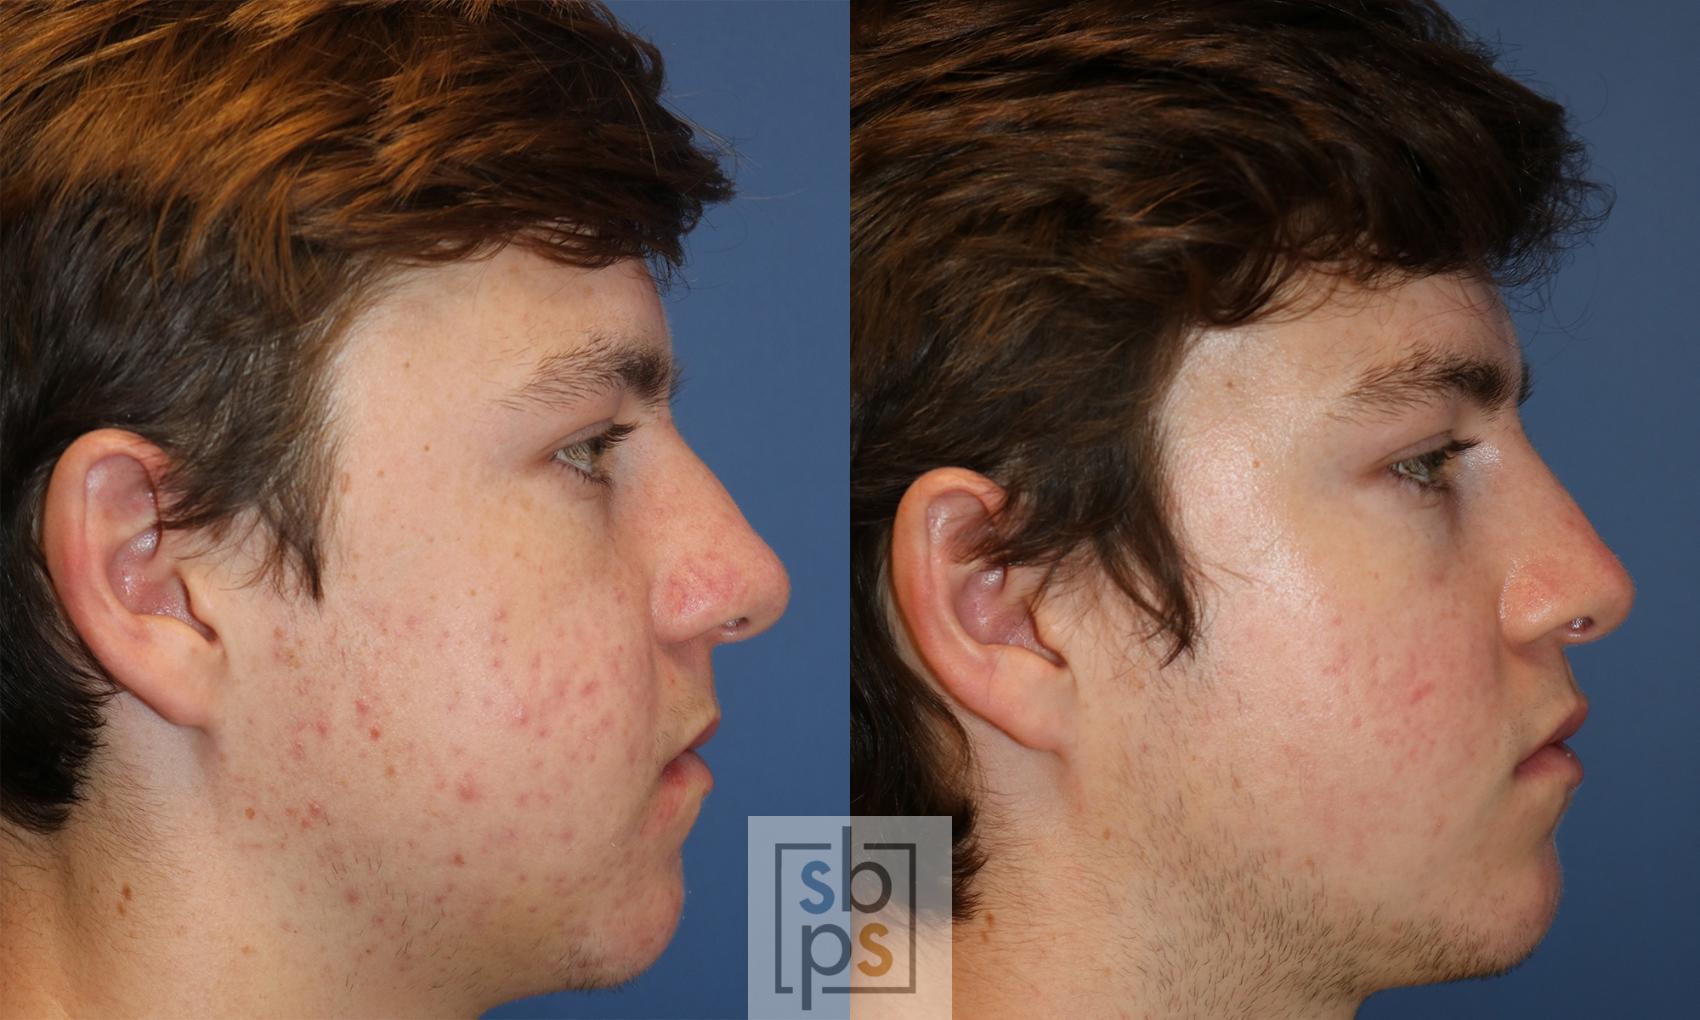 Before & After Nose Surgery (Rhinoplasty) Case 430 Right Side View in Torrance, CA